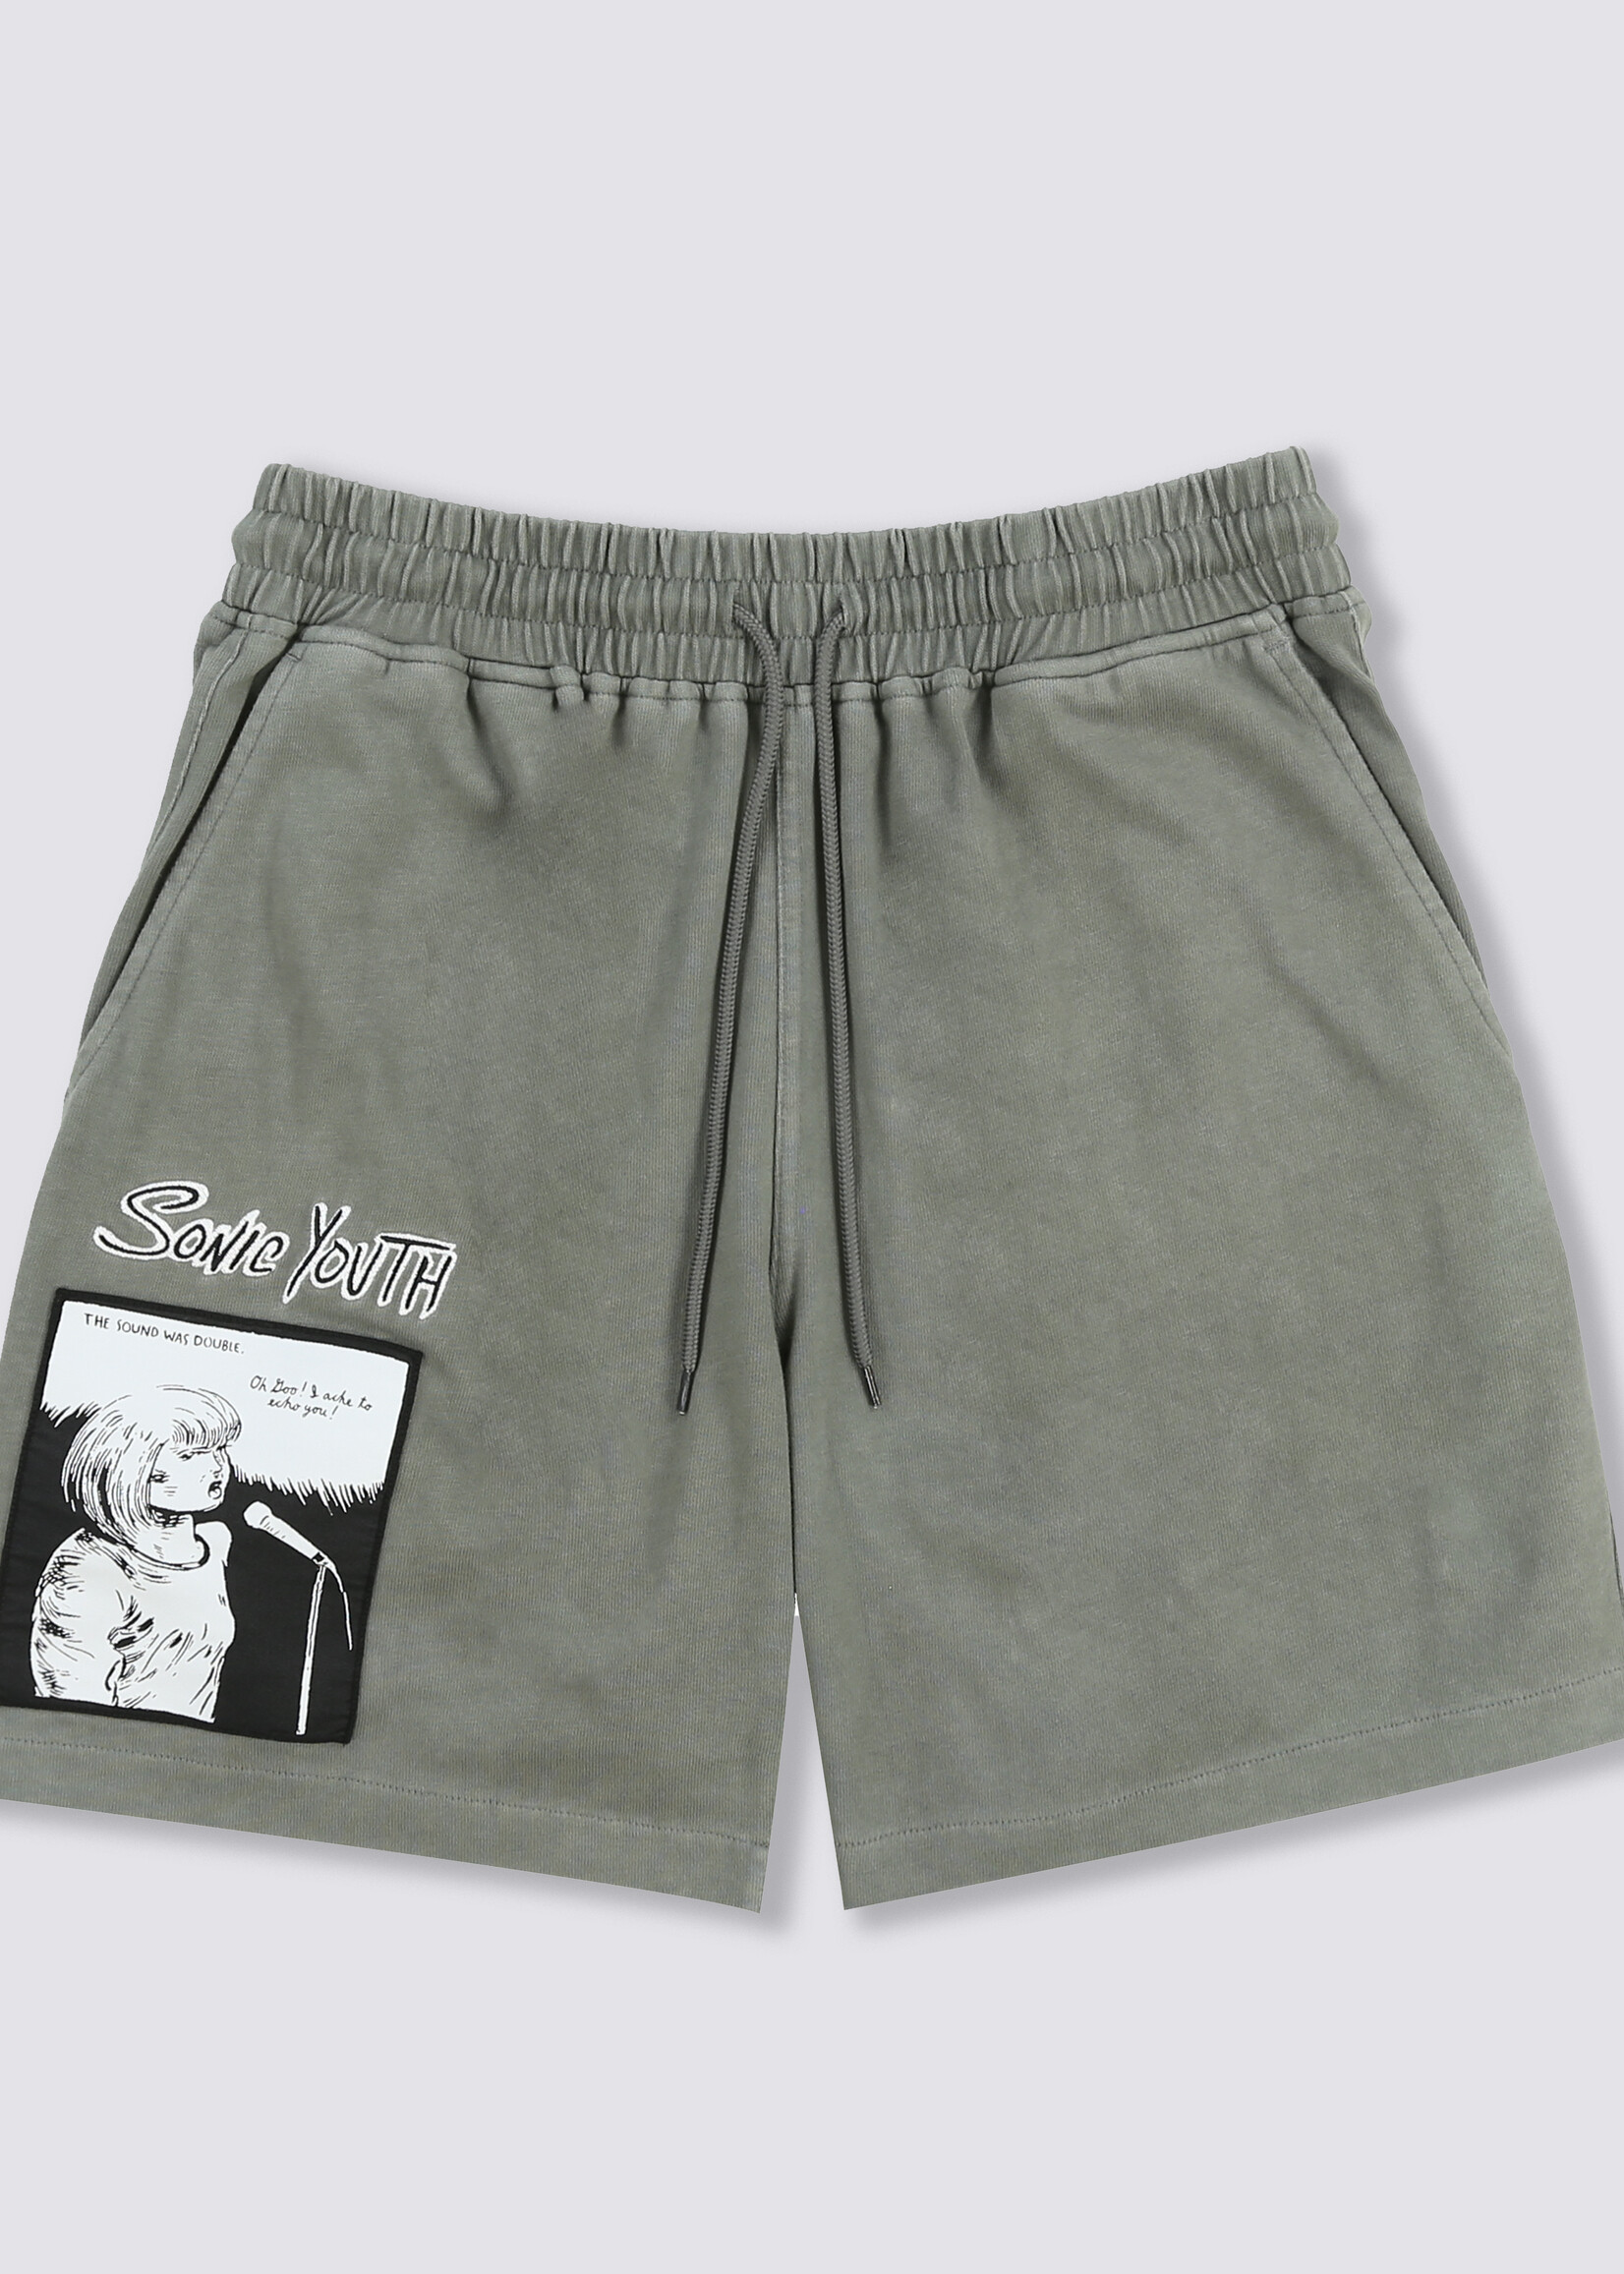 PLEASURES PLEASURES X SONIC YOUTH Singer Shorts in Charcoal